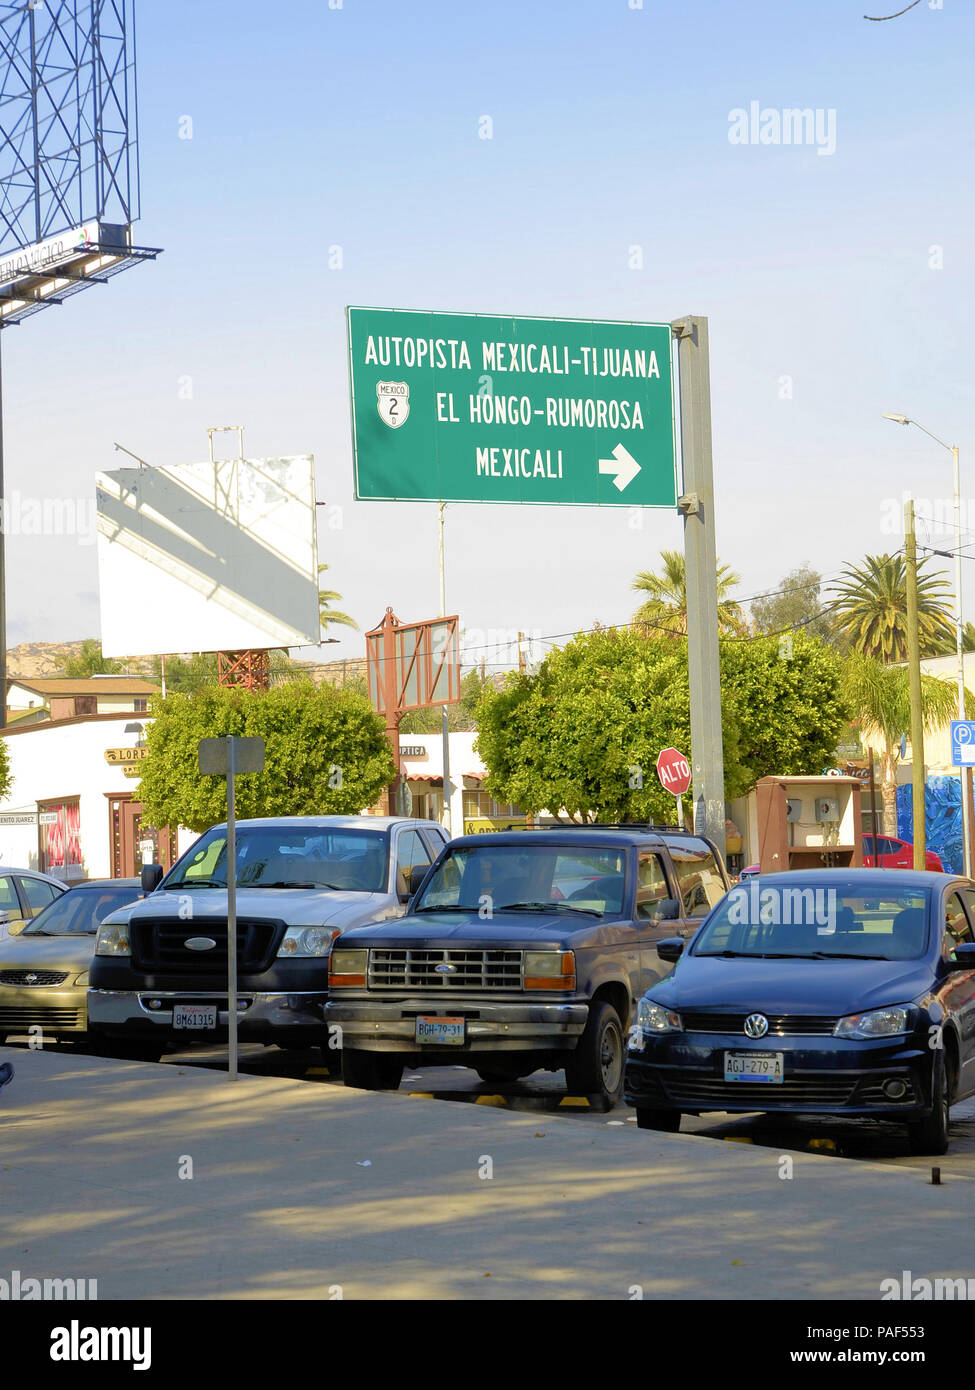 Sign for the Tijuana-Mexicali highway from Tecate towards Mexicali and La Rumorosa from Parque Miguel Hidalgo in downtown Tecate, Baja Calif., Mexico. Stock Photo